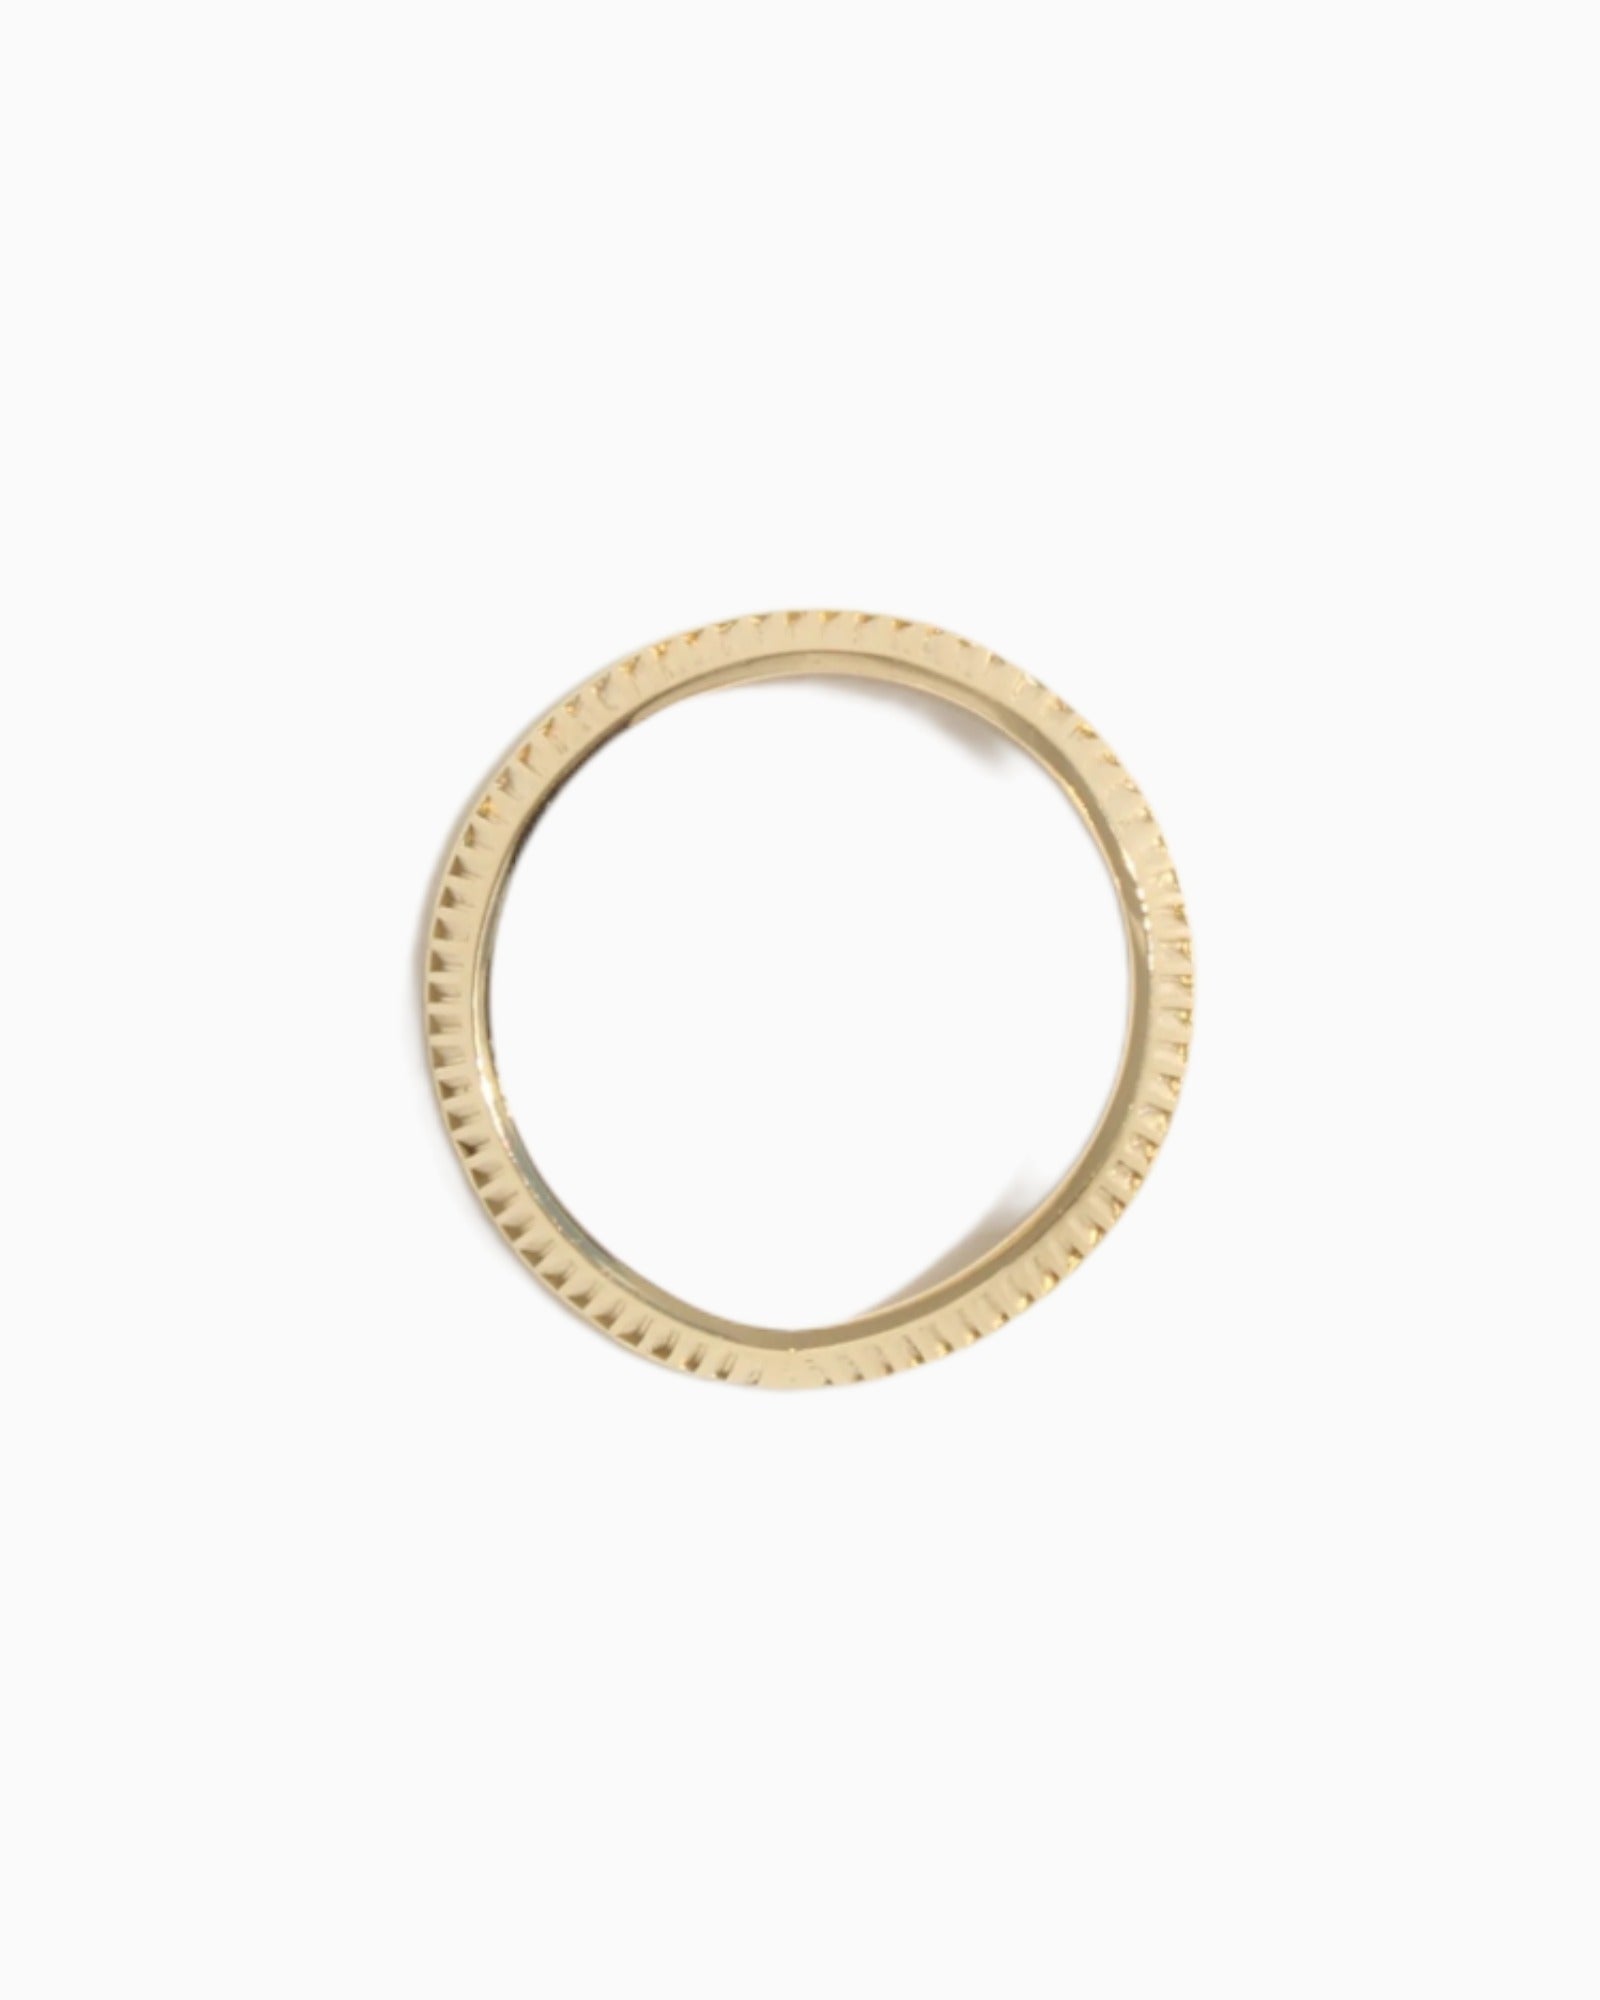 FANN! Simple gold ring Wavy #02 with 2N 10 micron gold